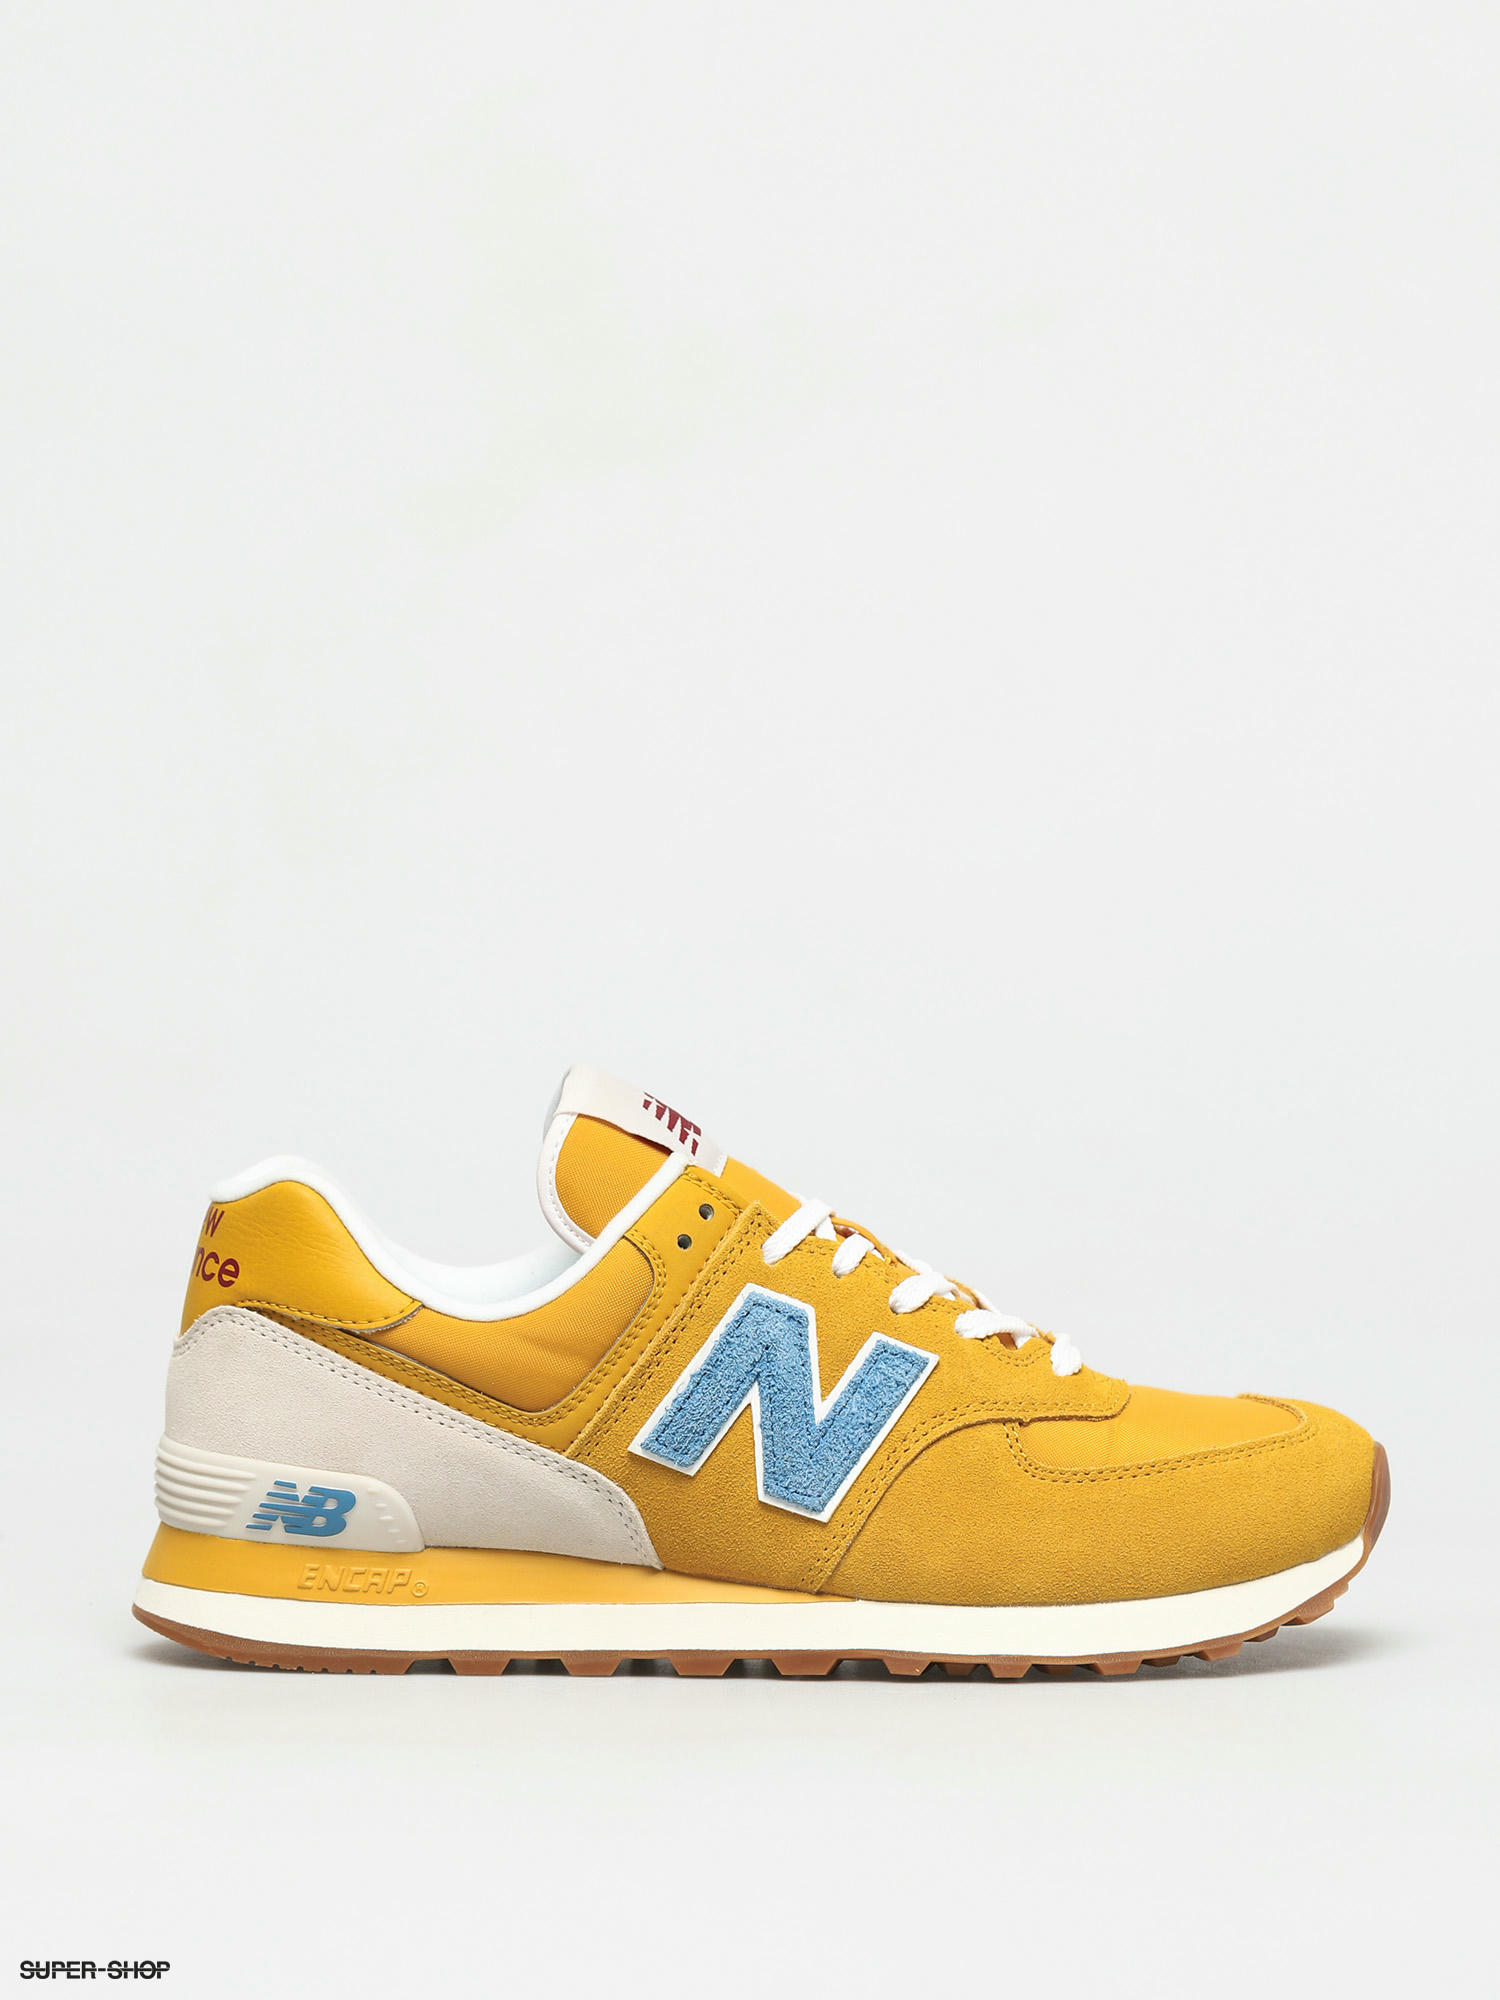 New Balance 574 Blue Yellow Outlet Store, UP TO 60% OFF